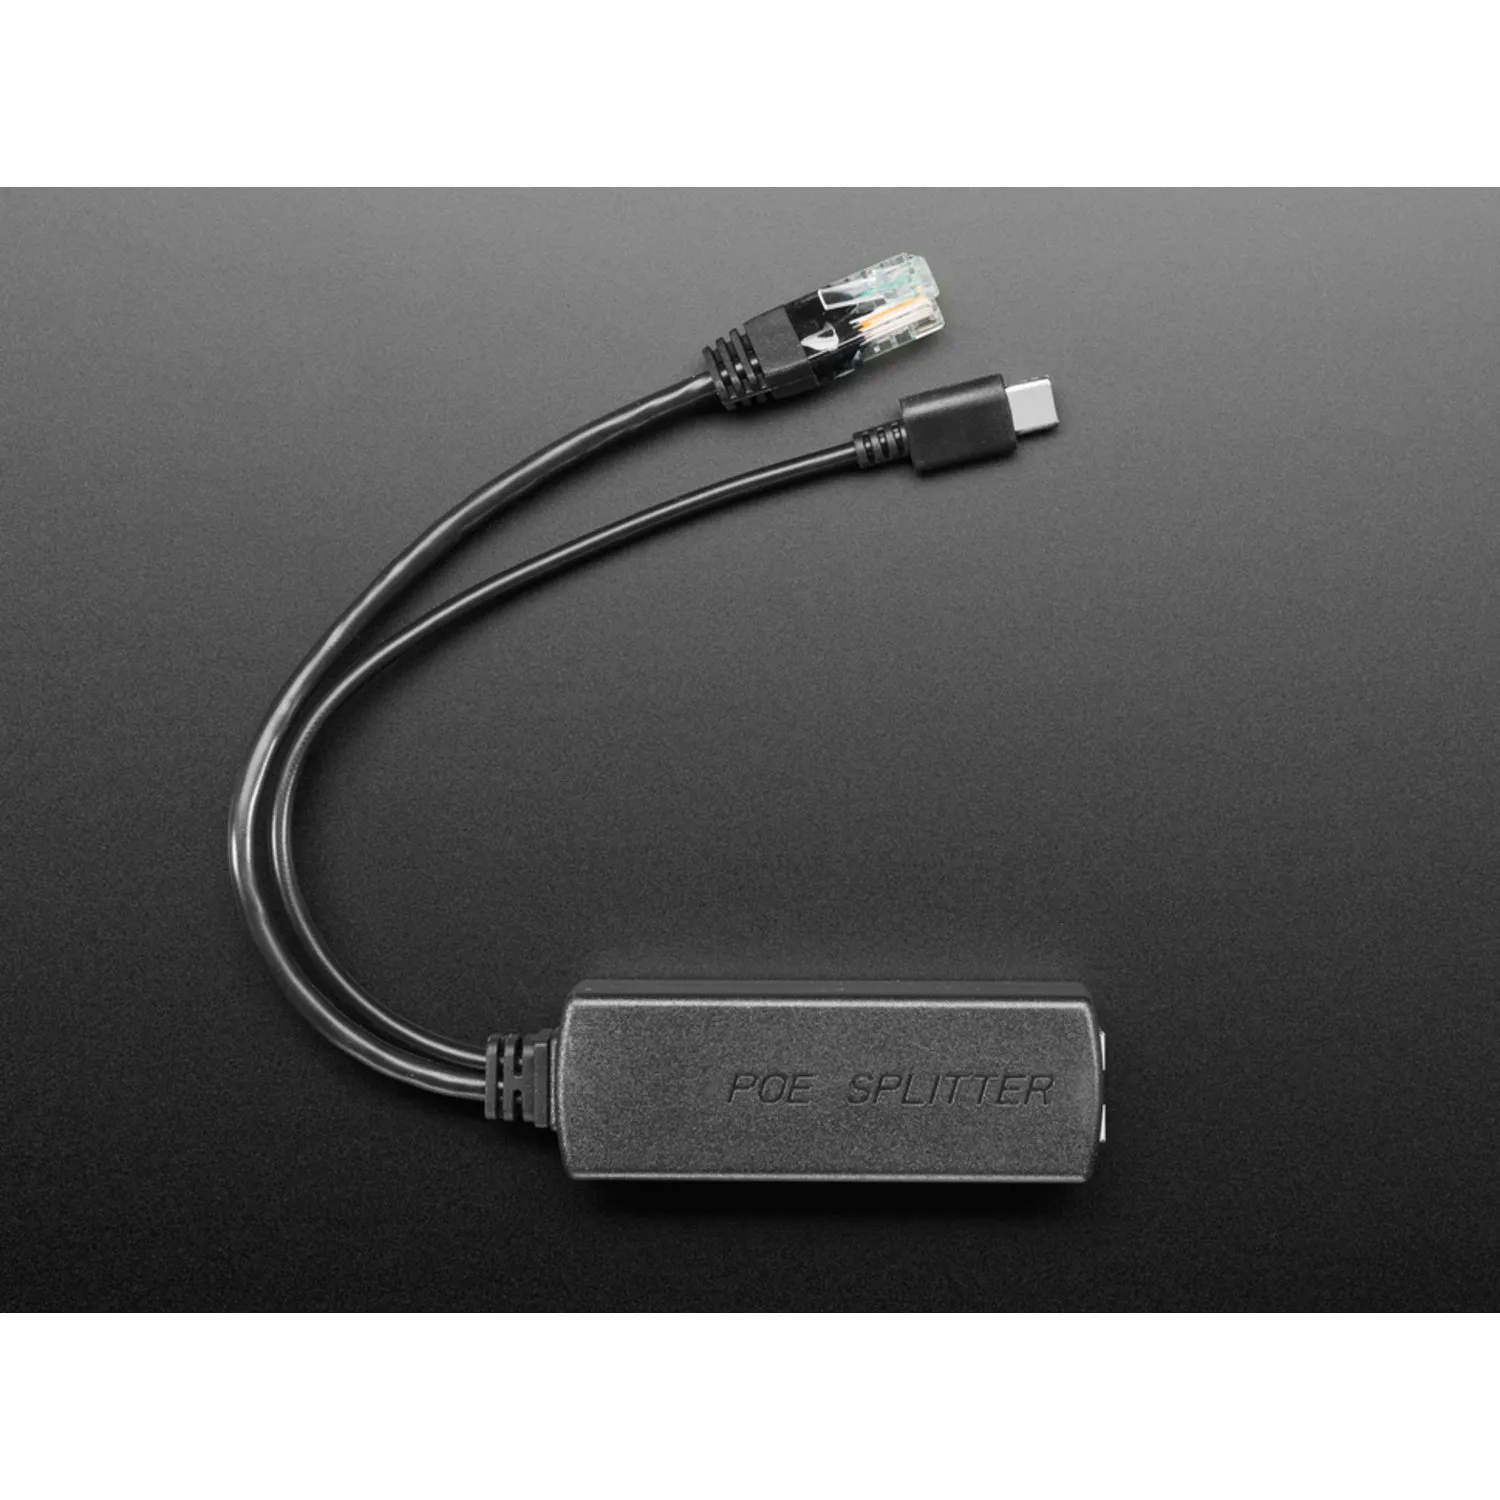 Photo of PoE Splitter with USB Type C - 5V 2A - 100 MB Ethernet